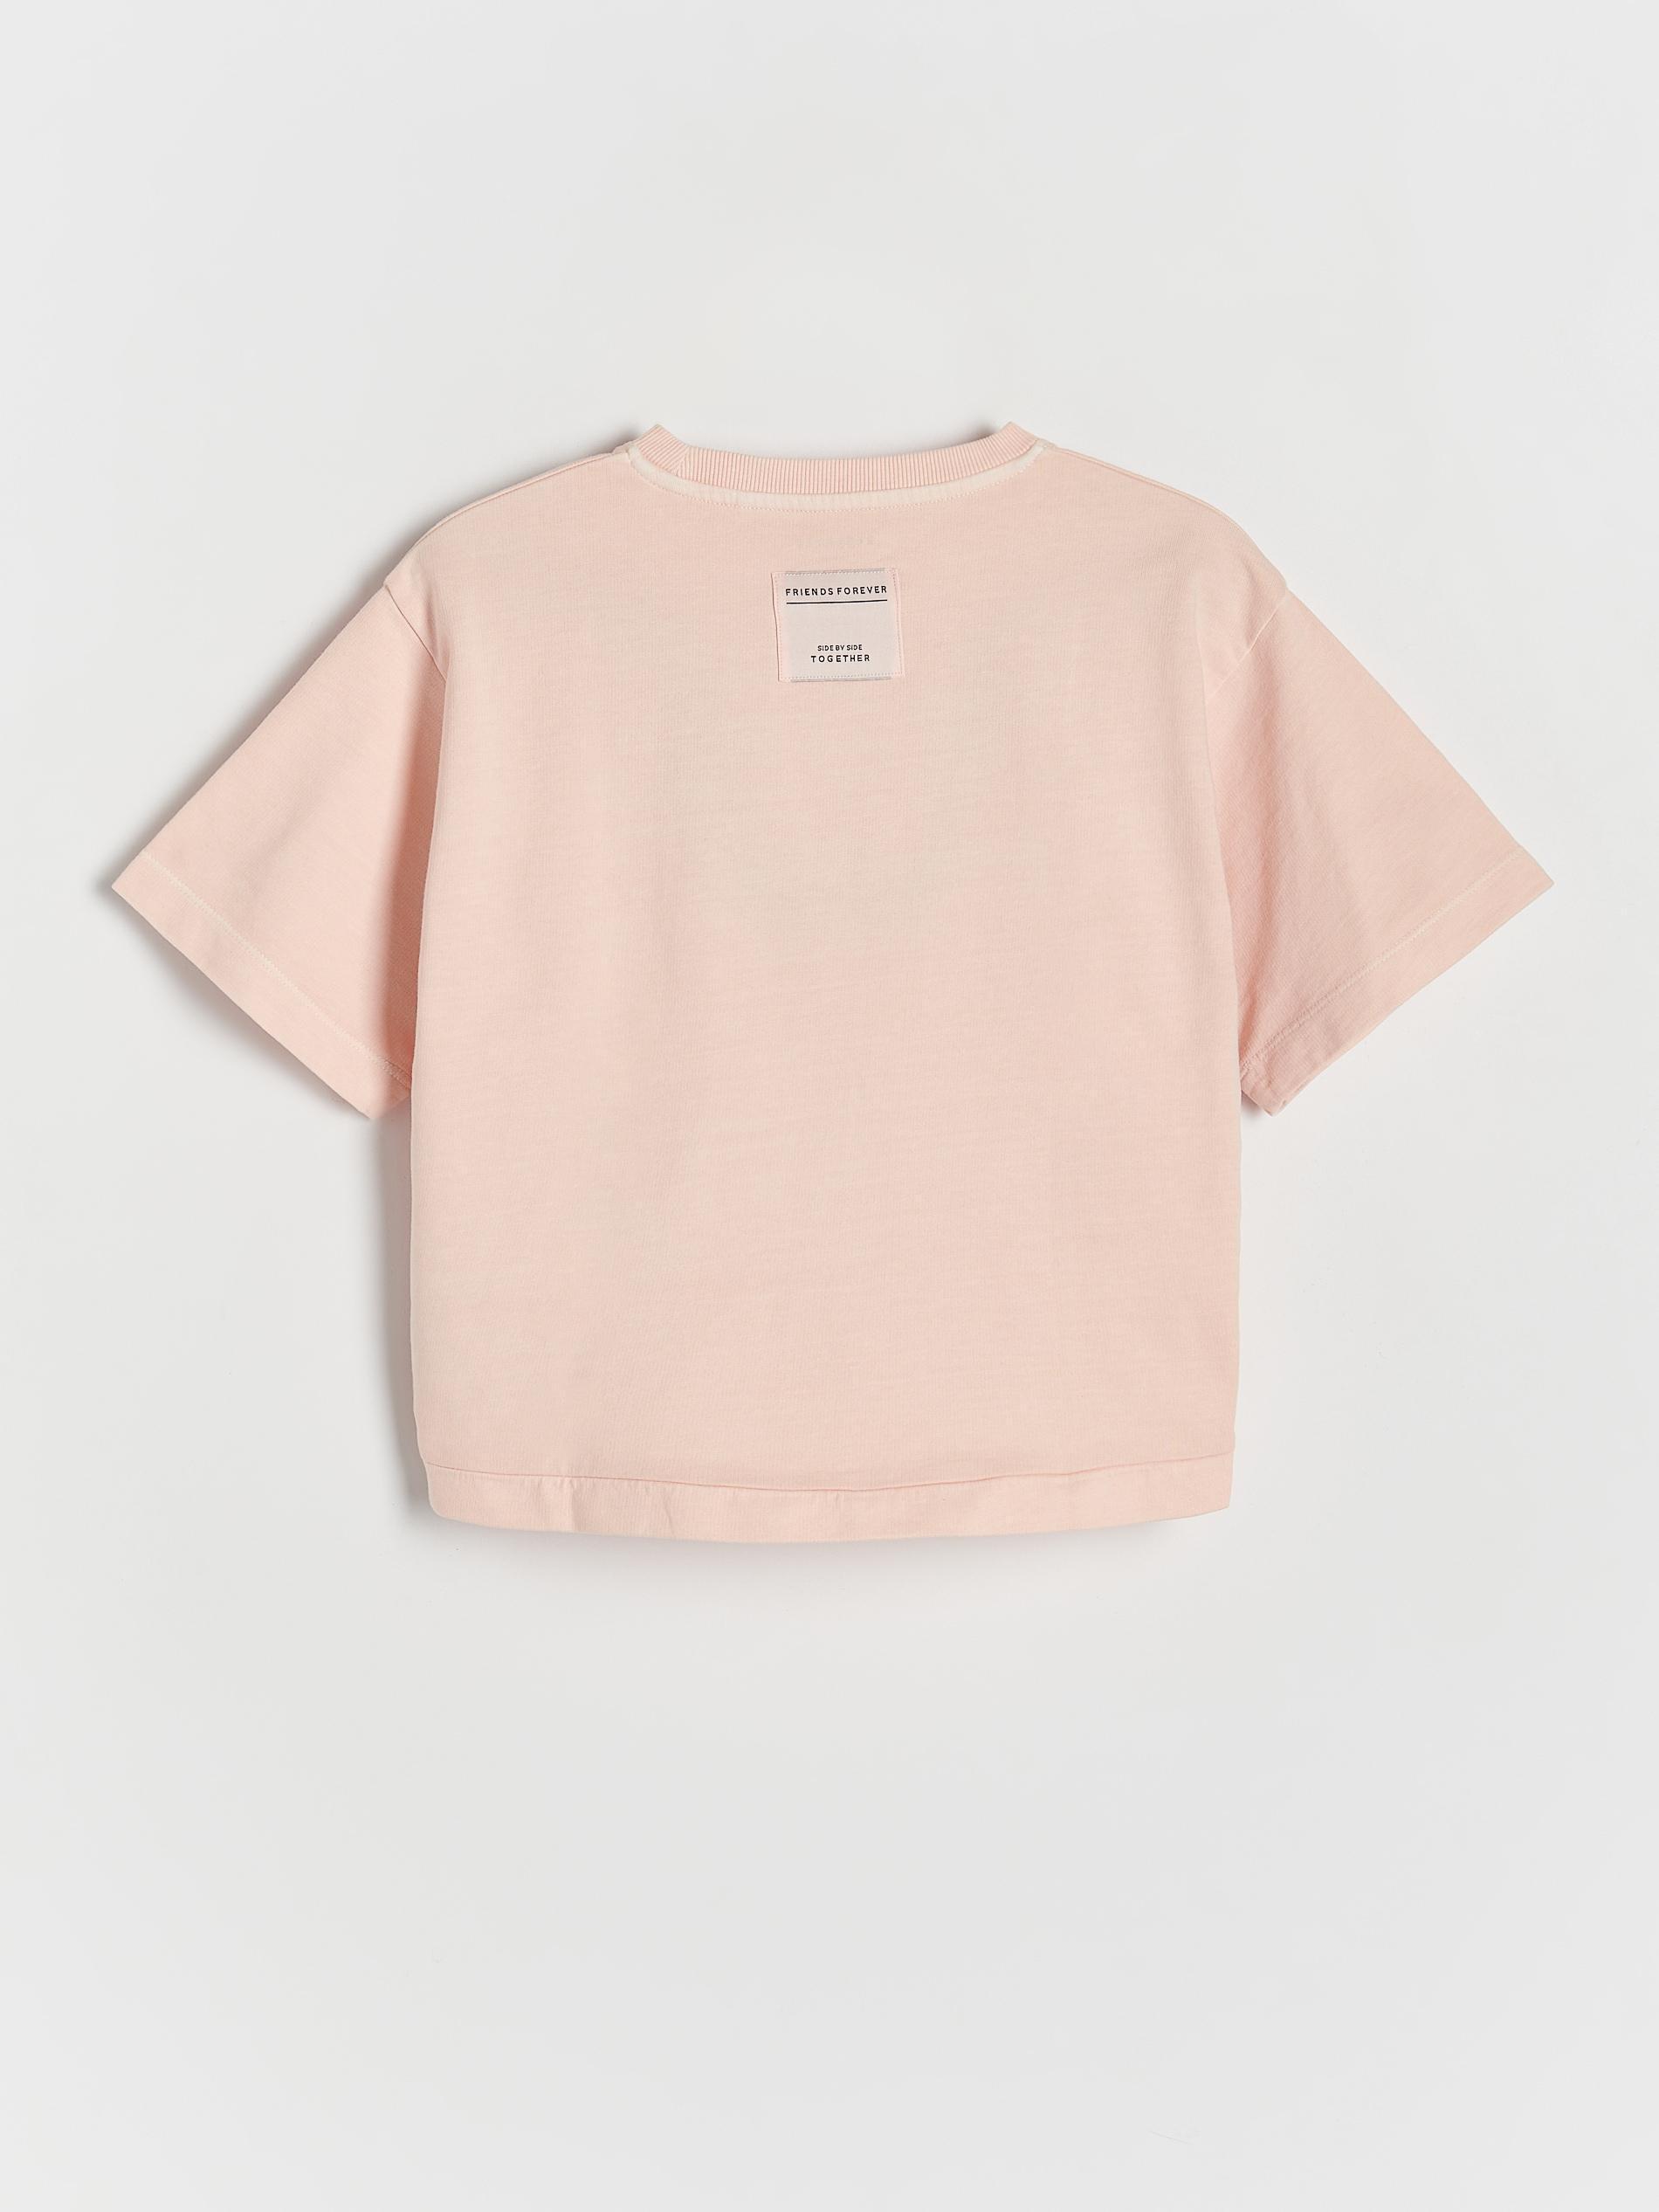 Reserved - Pink Crew Neck Blouse, Kids Girls